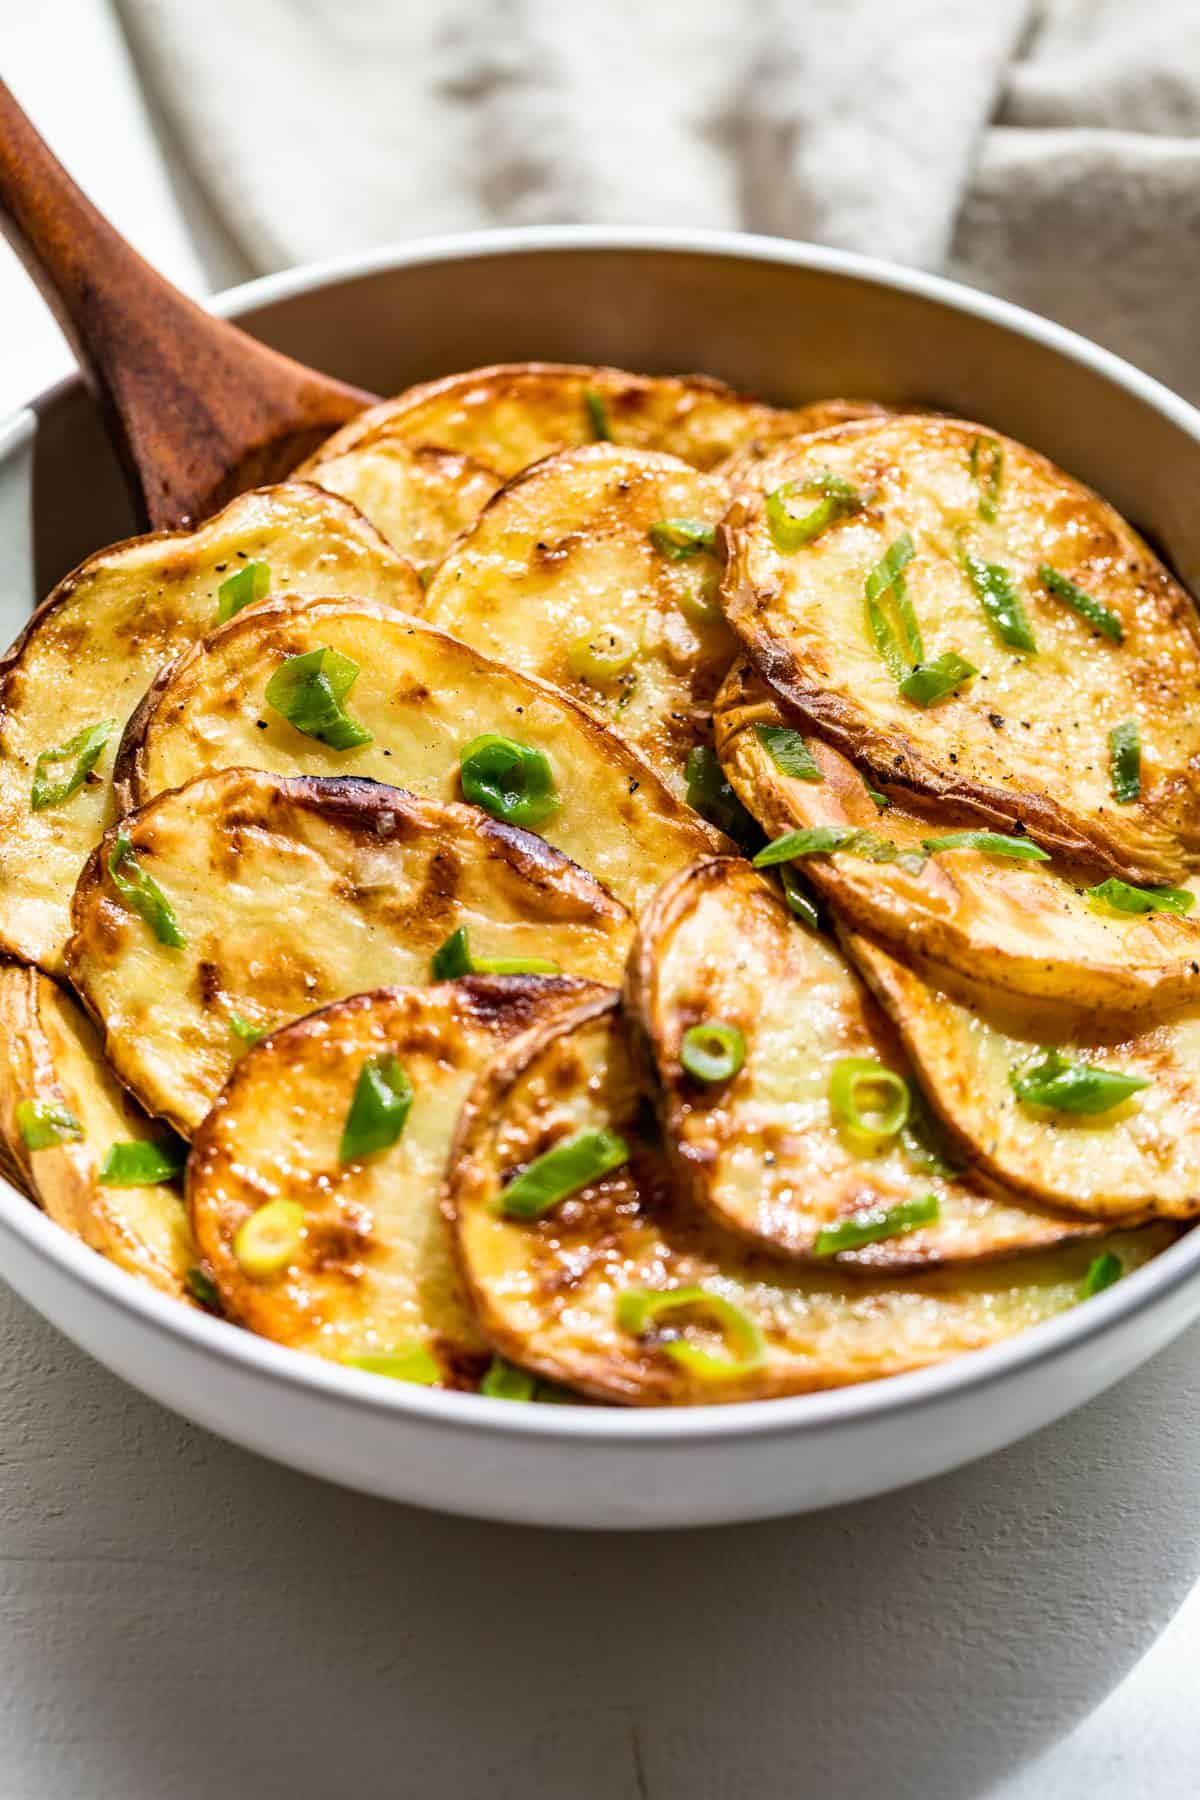 A large white bowl with grilled sliced potatoes topped with green onions with a wood spoon.